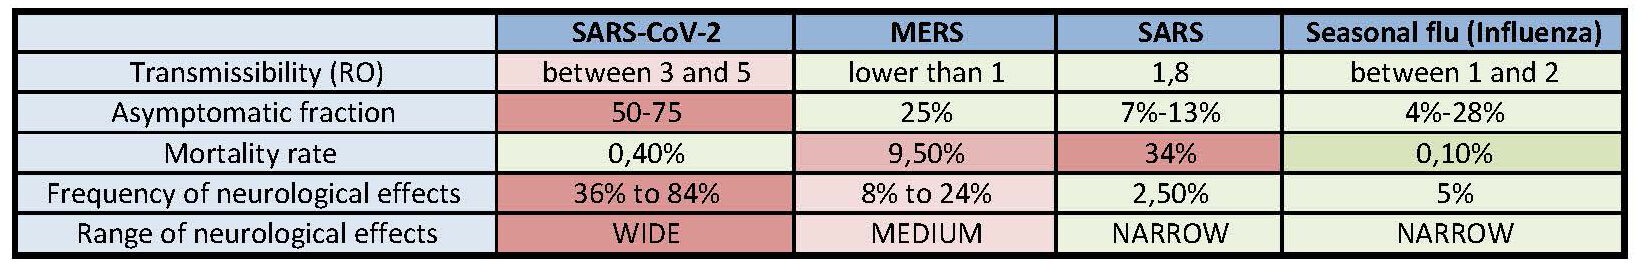 SARS-CoV-2 compared MERS, SARS and influenza